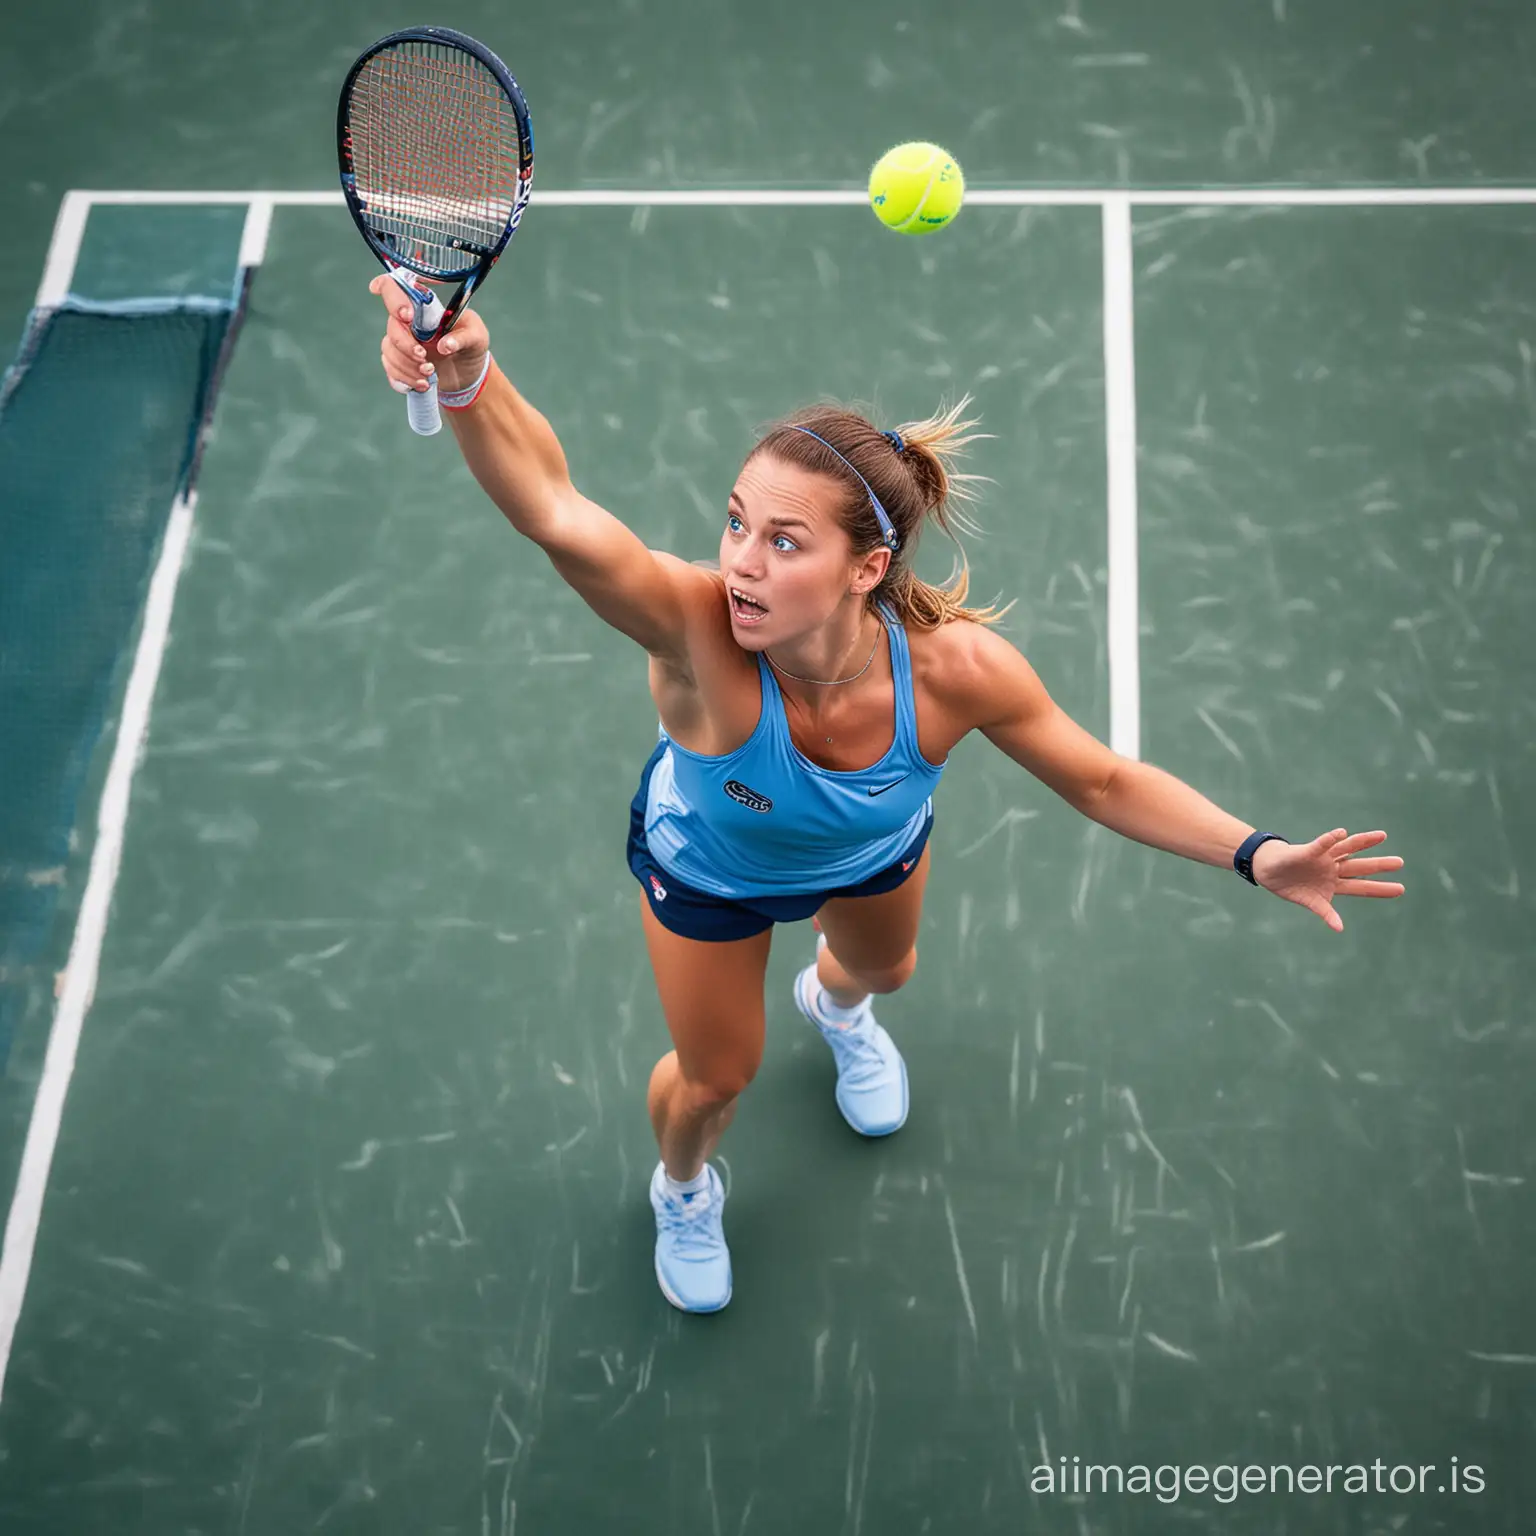 a blue-eyed padel player watches the ball she just threw above her head to smash, the photo is taken from above her